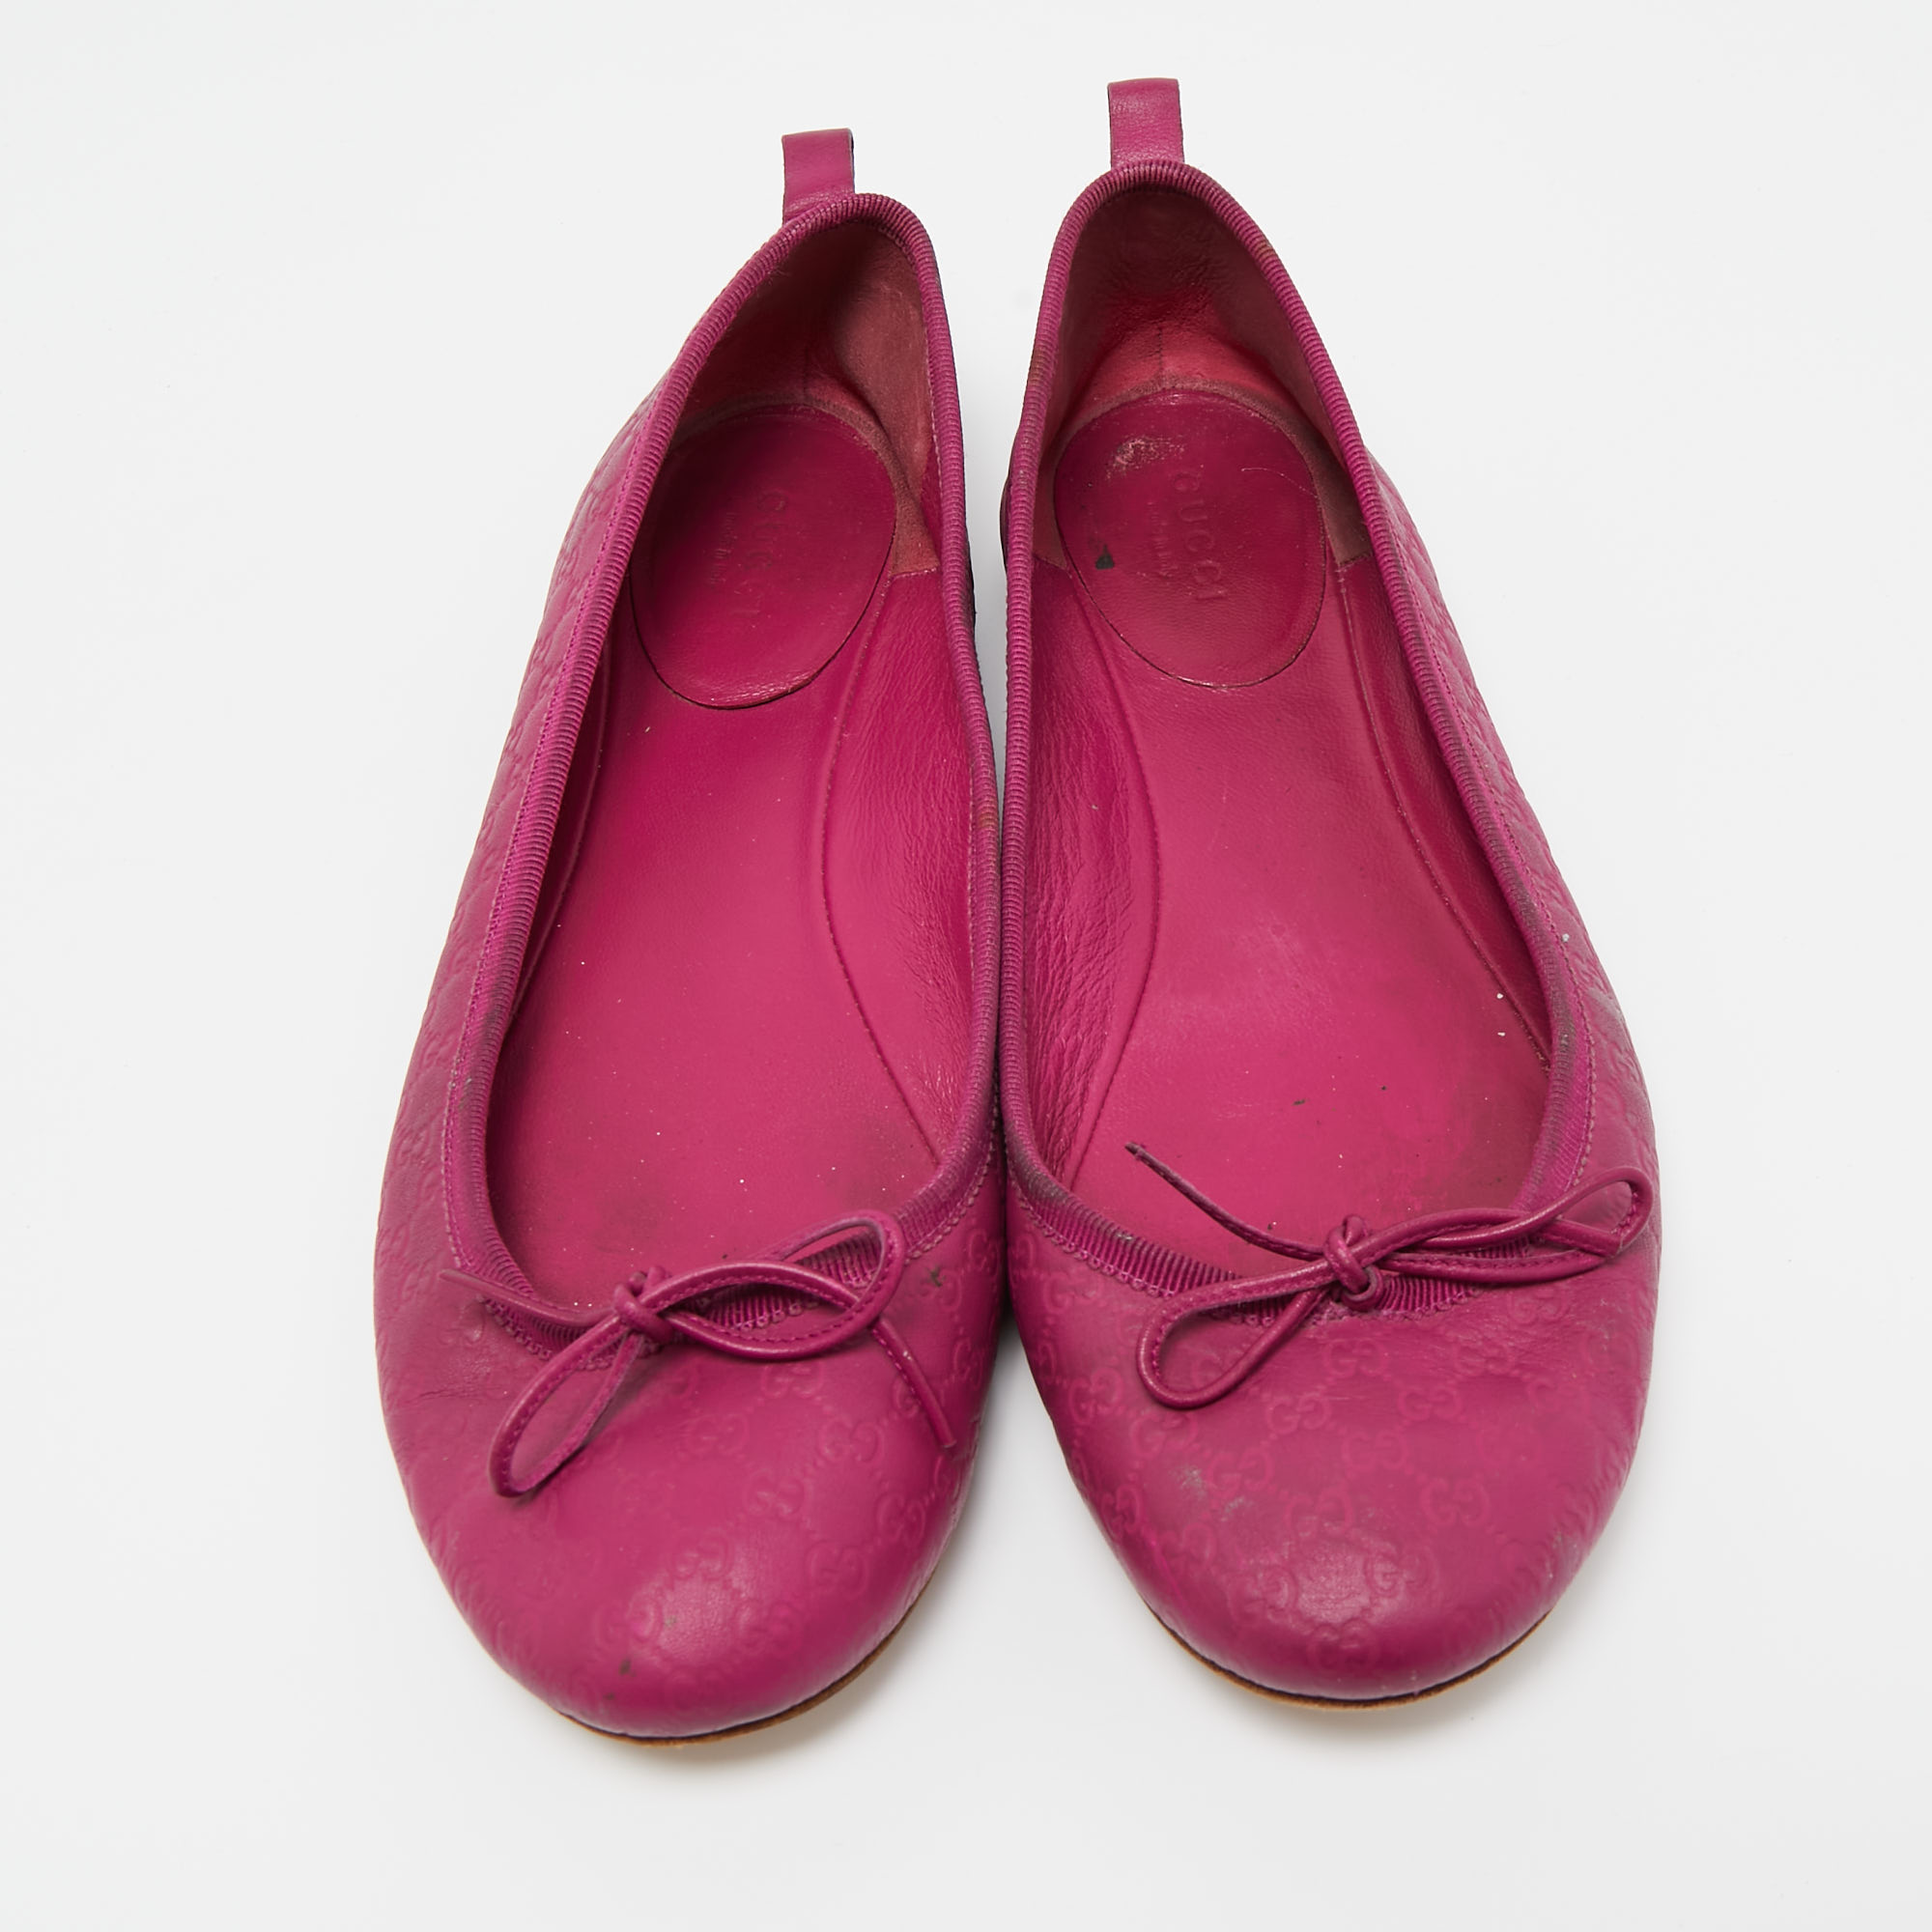 Gucci Pink Leather Bow Detail Microguccissima Ballet Flats Size 39